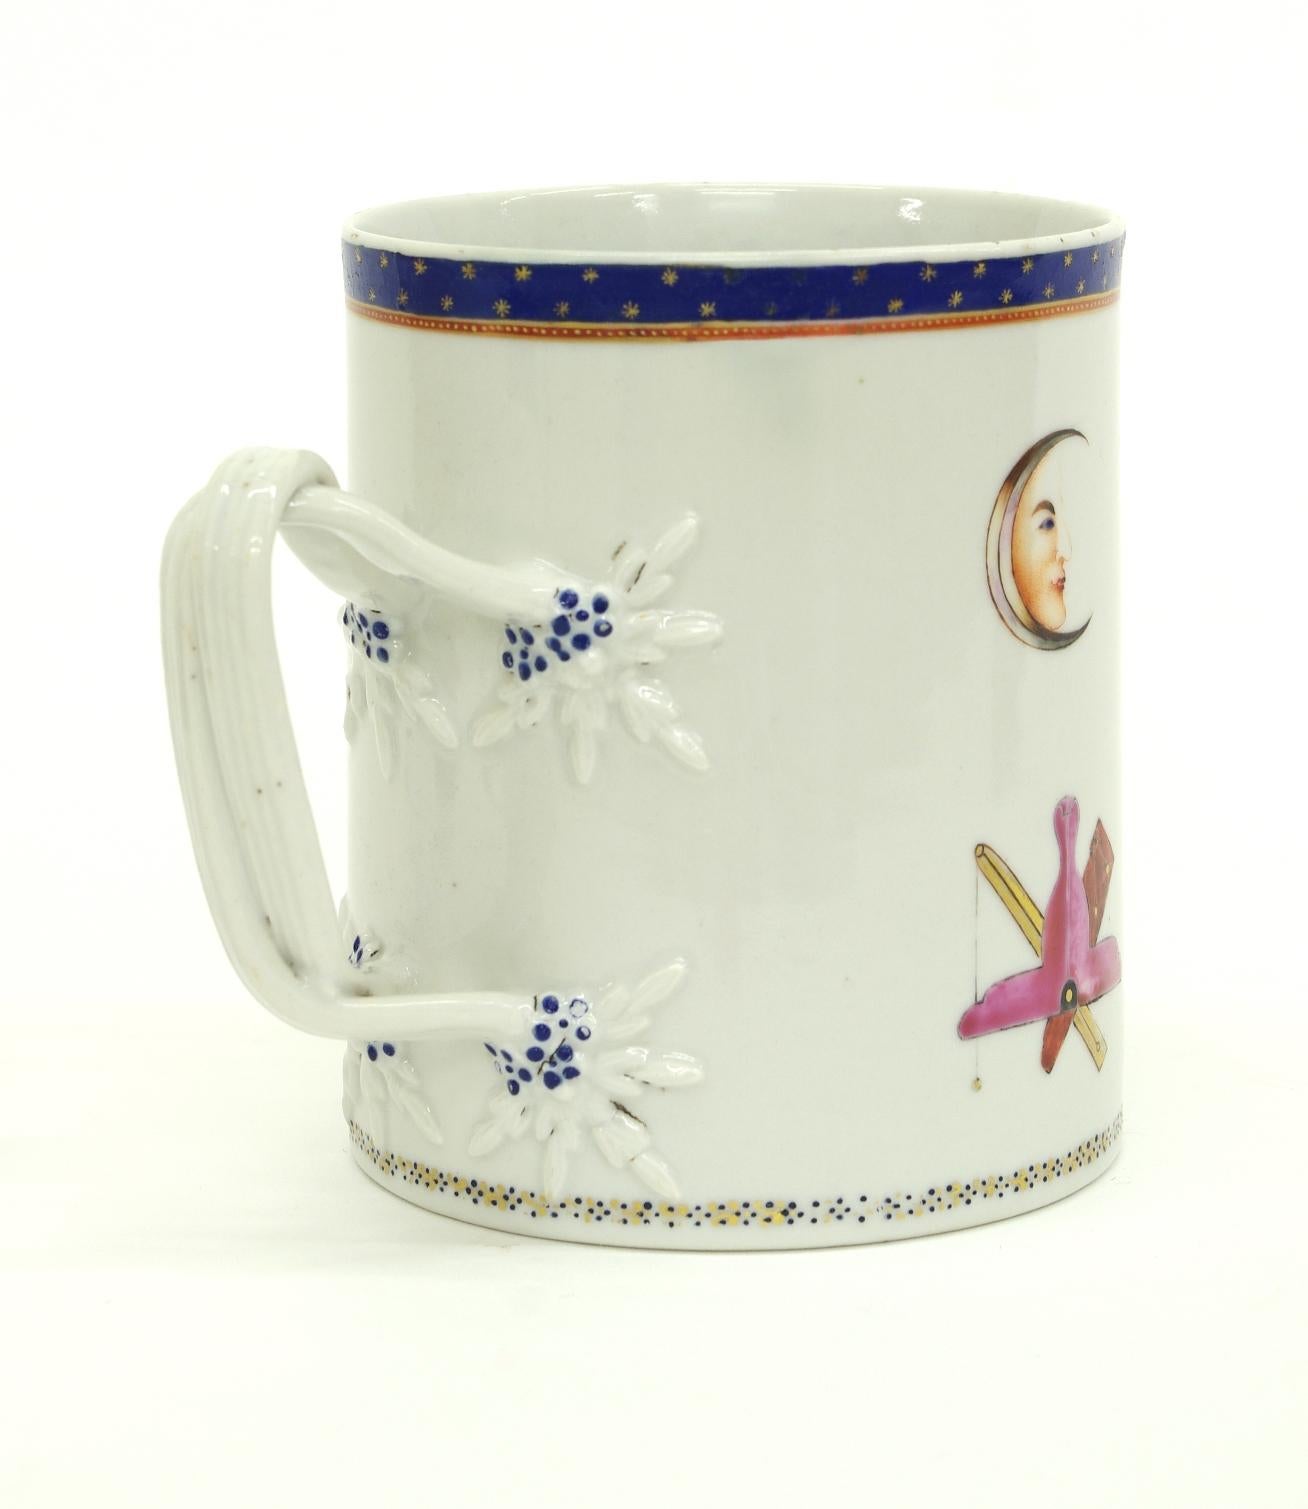 Chinese Export Porcelain Masonic Mug, circa 1795 In Fair Condition For Sale In St. Louis, MO